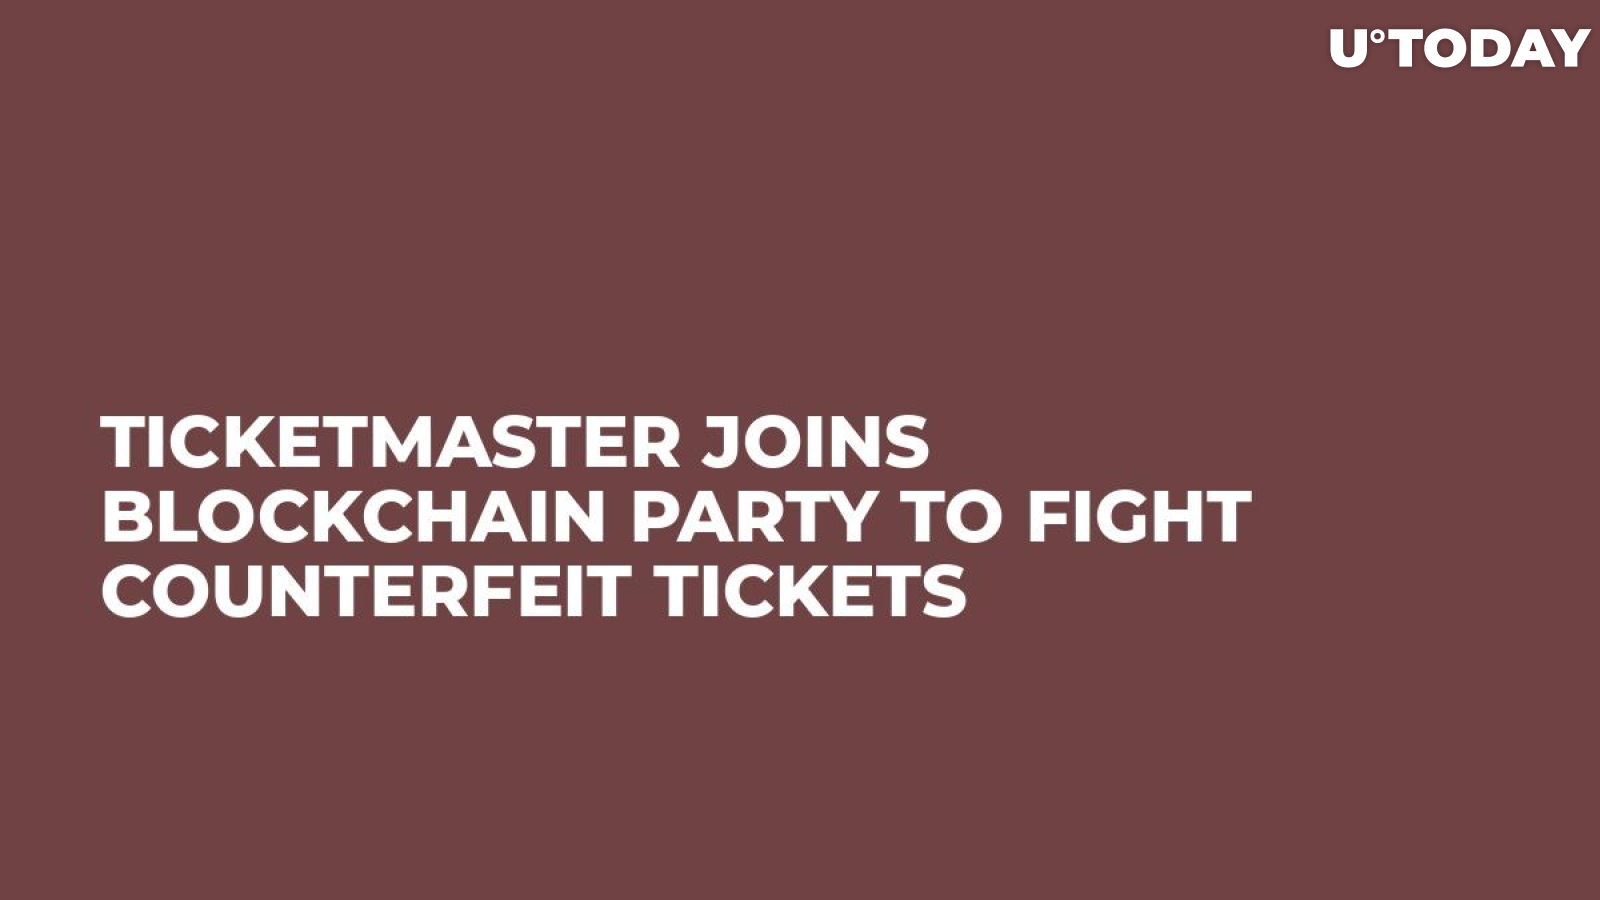 Ticketmaster Joins Blockchain Party to Fight Counterfeit Tickets